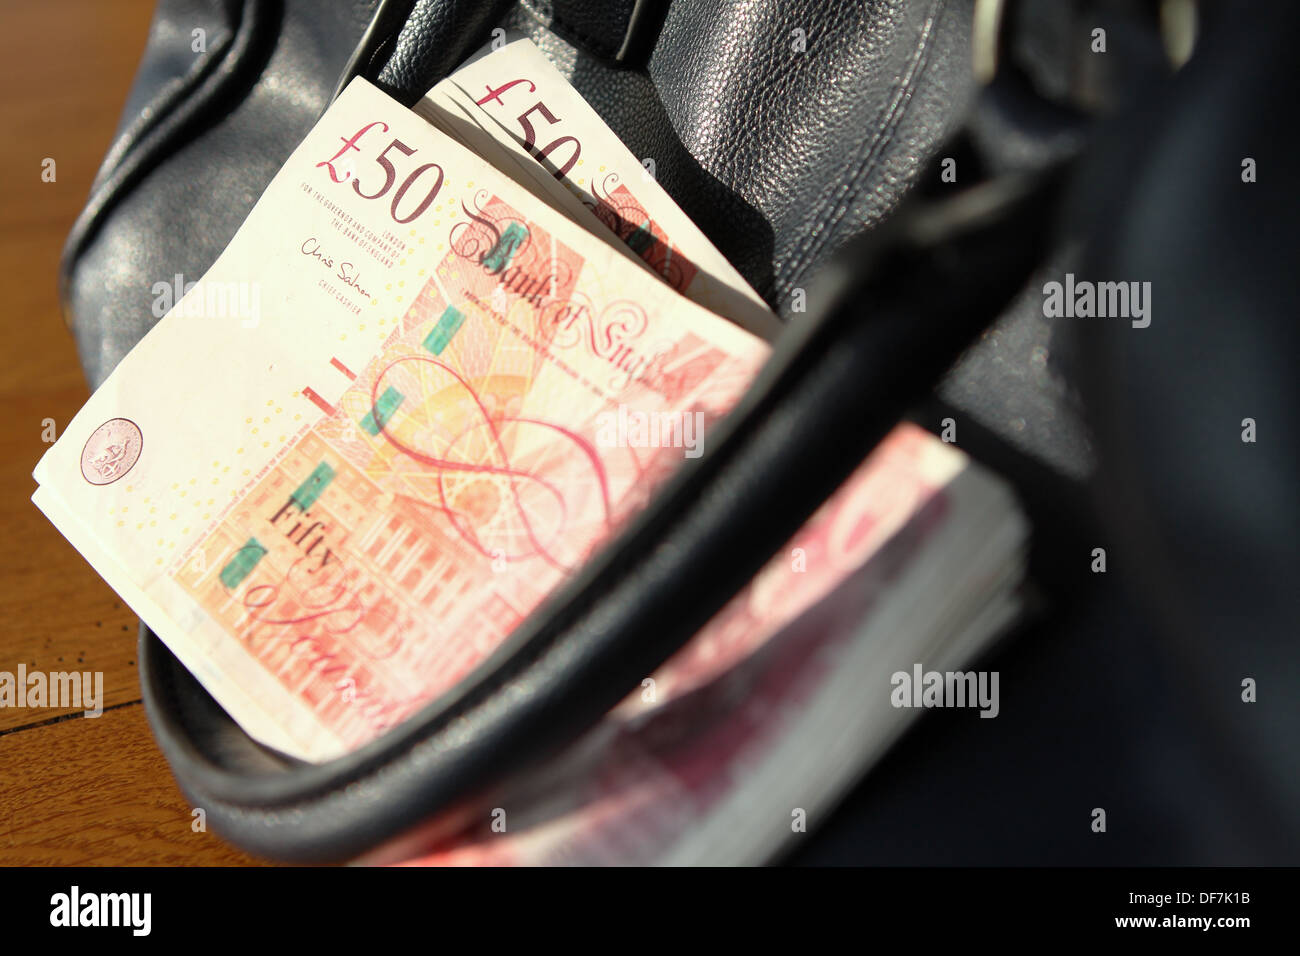 A bunch of sterling £50 notes in between the handle and body of a handbag Stock Photo